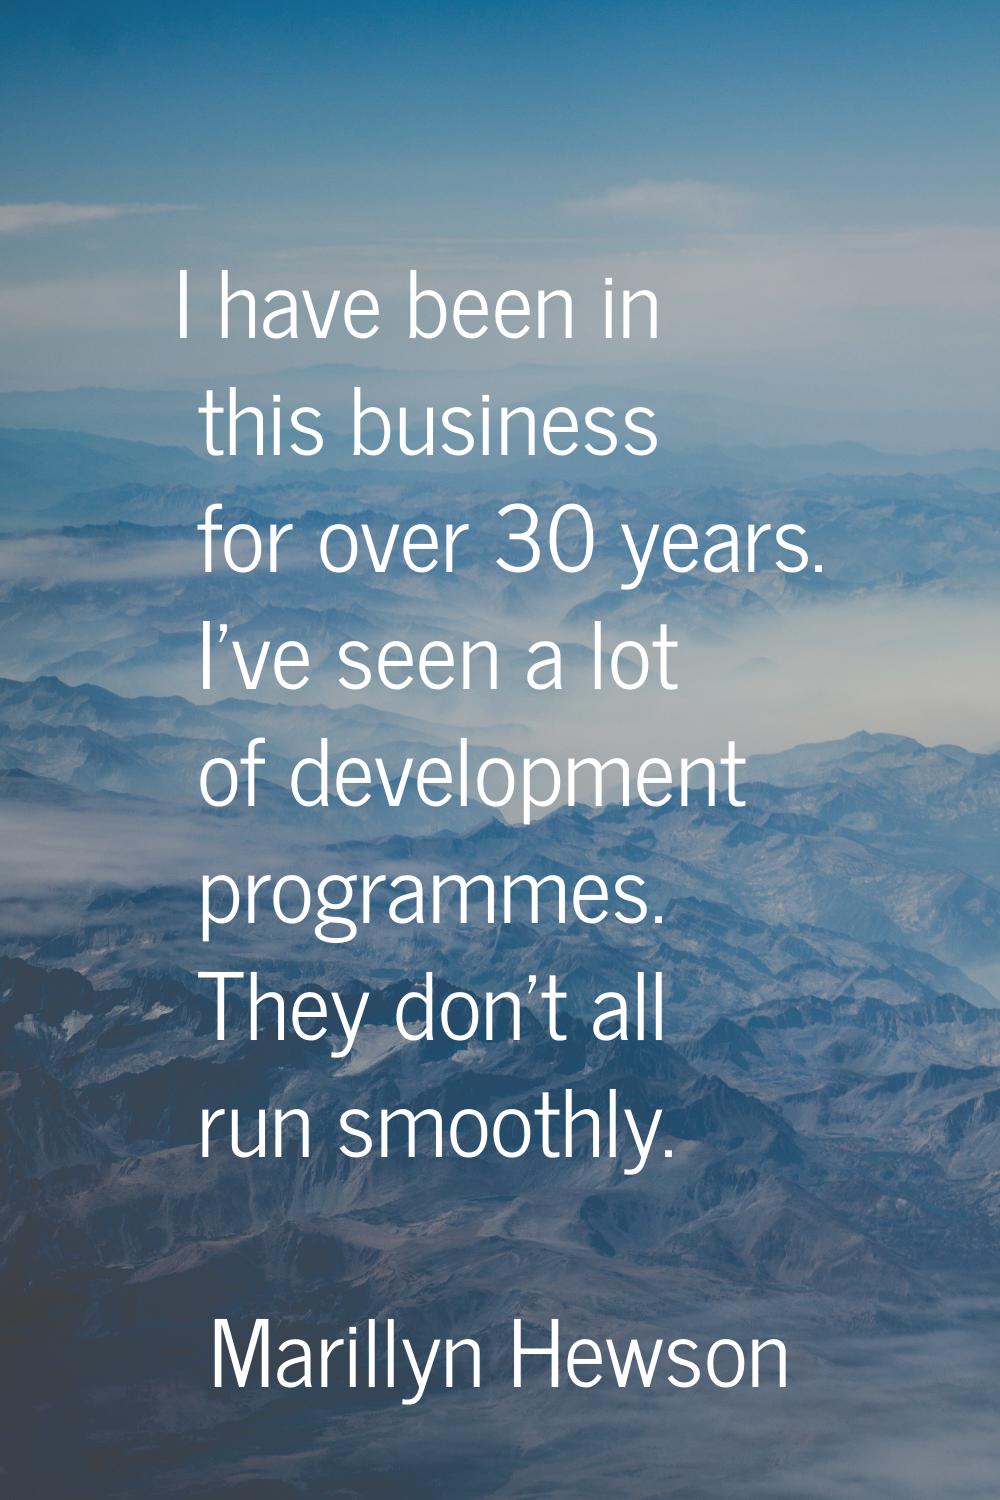 I have been in this business for over 30 years. I've seen a lot of development programmes. They don